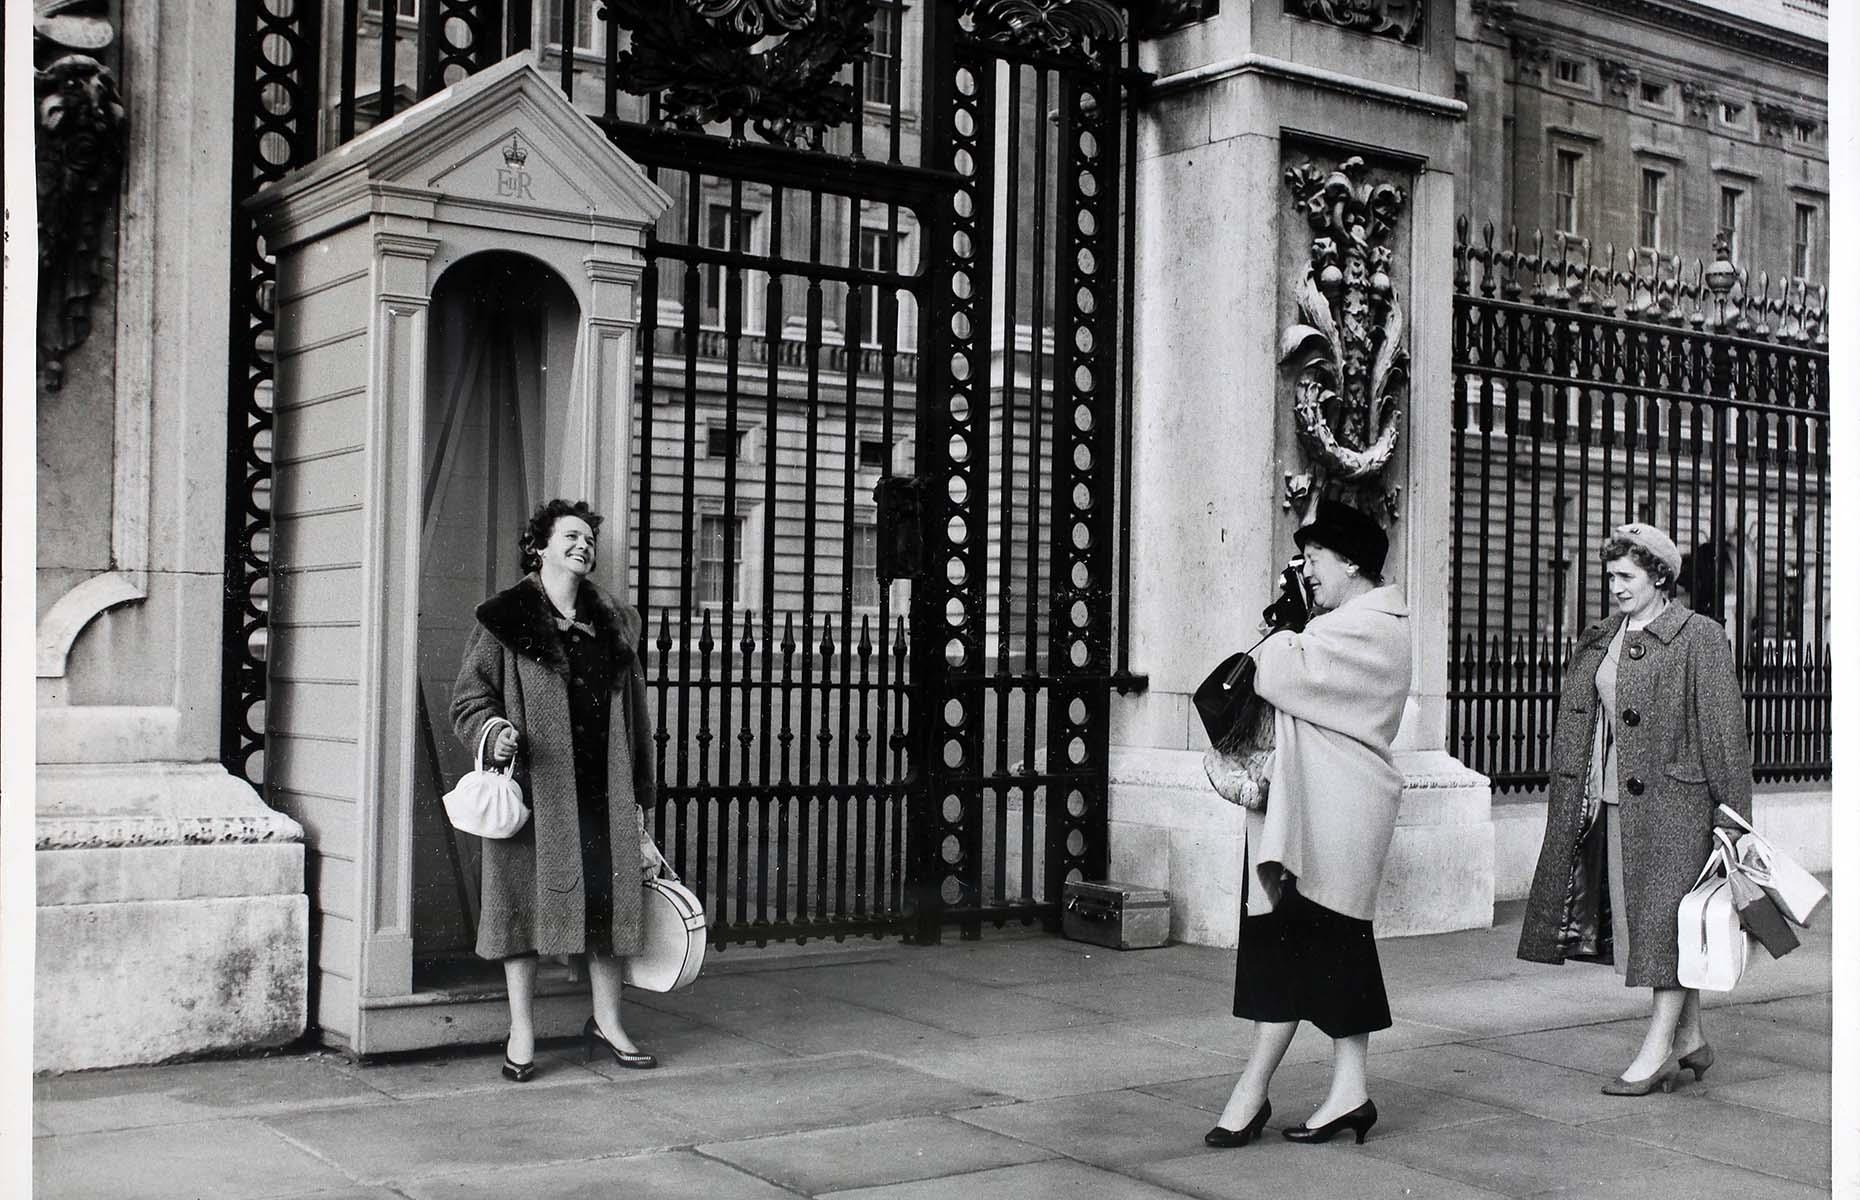 Buckingham Palace has been a highlight for tourists visiting the capital ever since it became an official residence of the monarch in 1837. These visiting ladies have managed to capture a historic snap – the last day when the sentry (palace guard) boxes were placed outside the gates. From this day in 1959, the sentry boxes have been set against the palace walls and the changing of those on sentry duty has taken place behind the railings, leaving tourists peering through to catch the tradition.